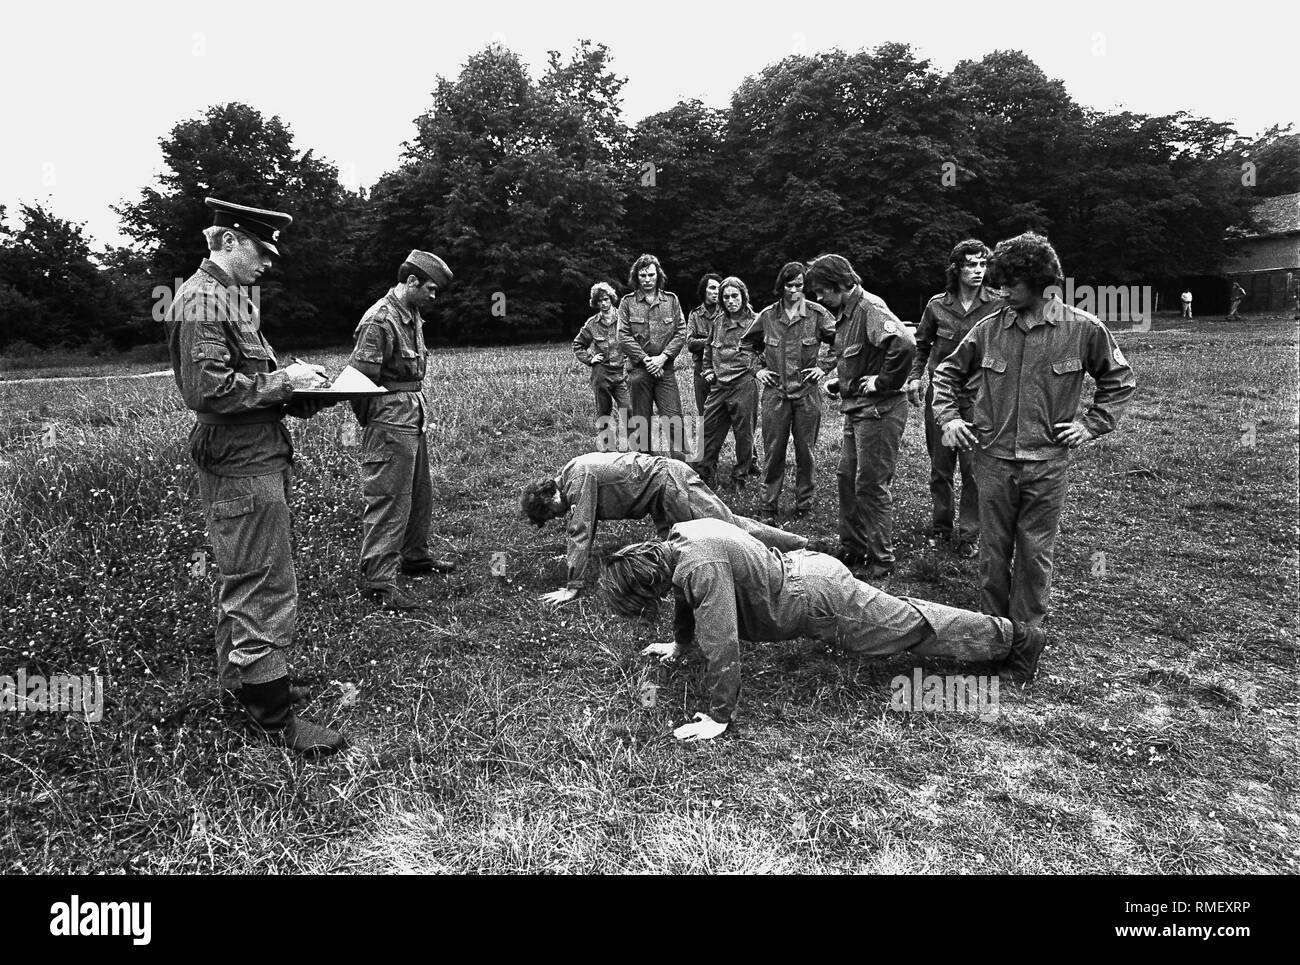 Members of the Gesellschaft fuer Sport und Technik (Sports and Technology Society) (GST) during their pre-military education. Stock Photo